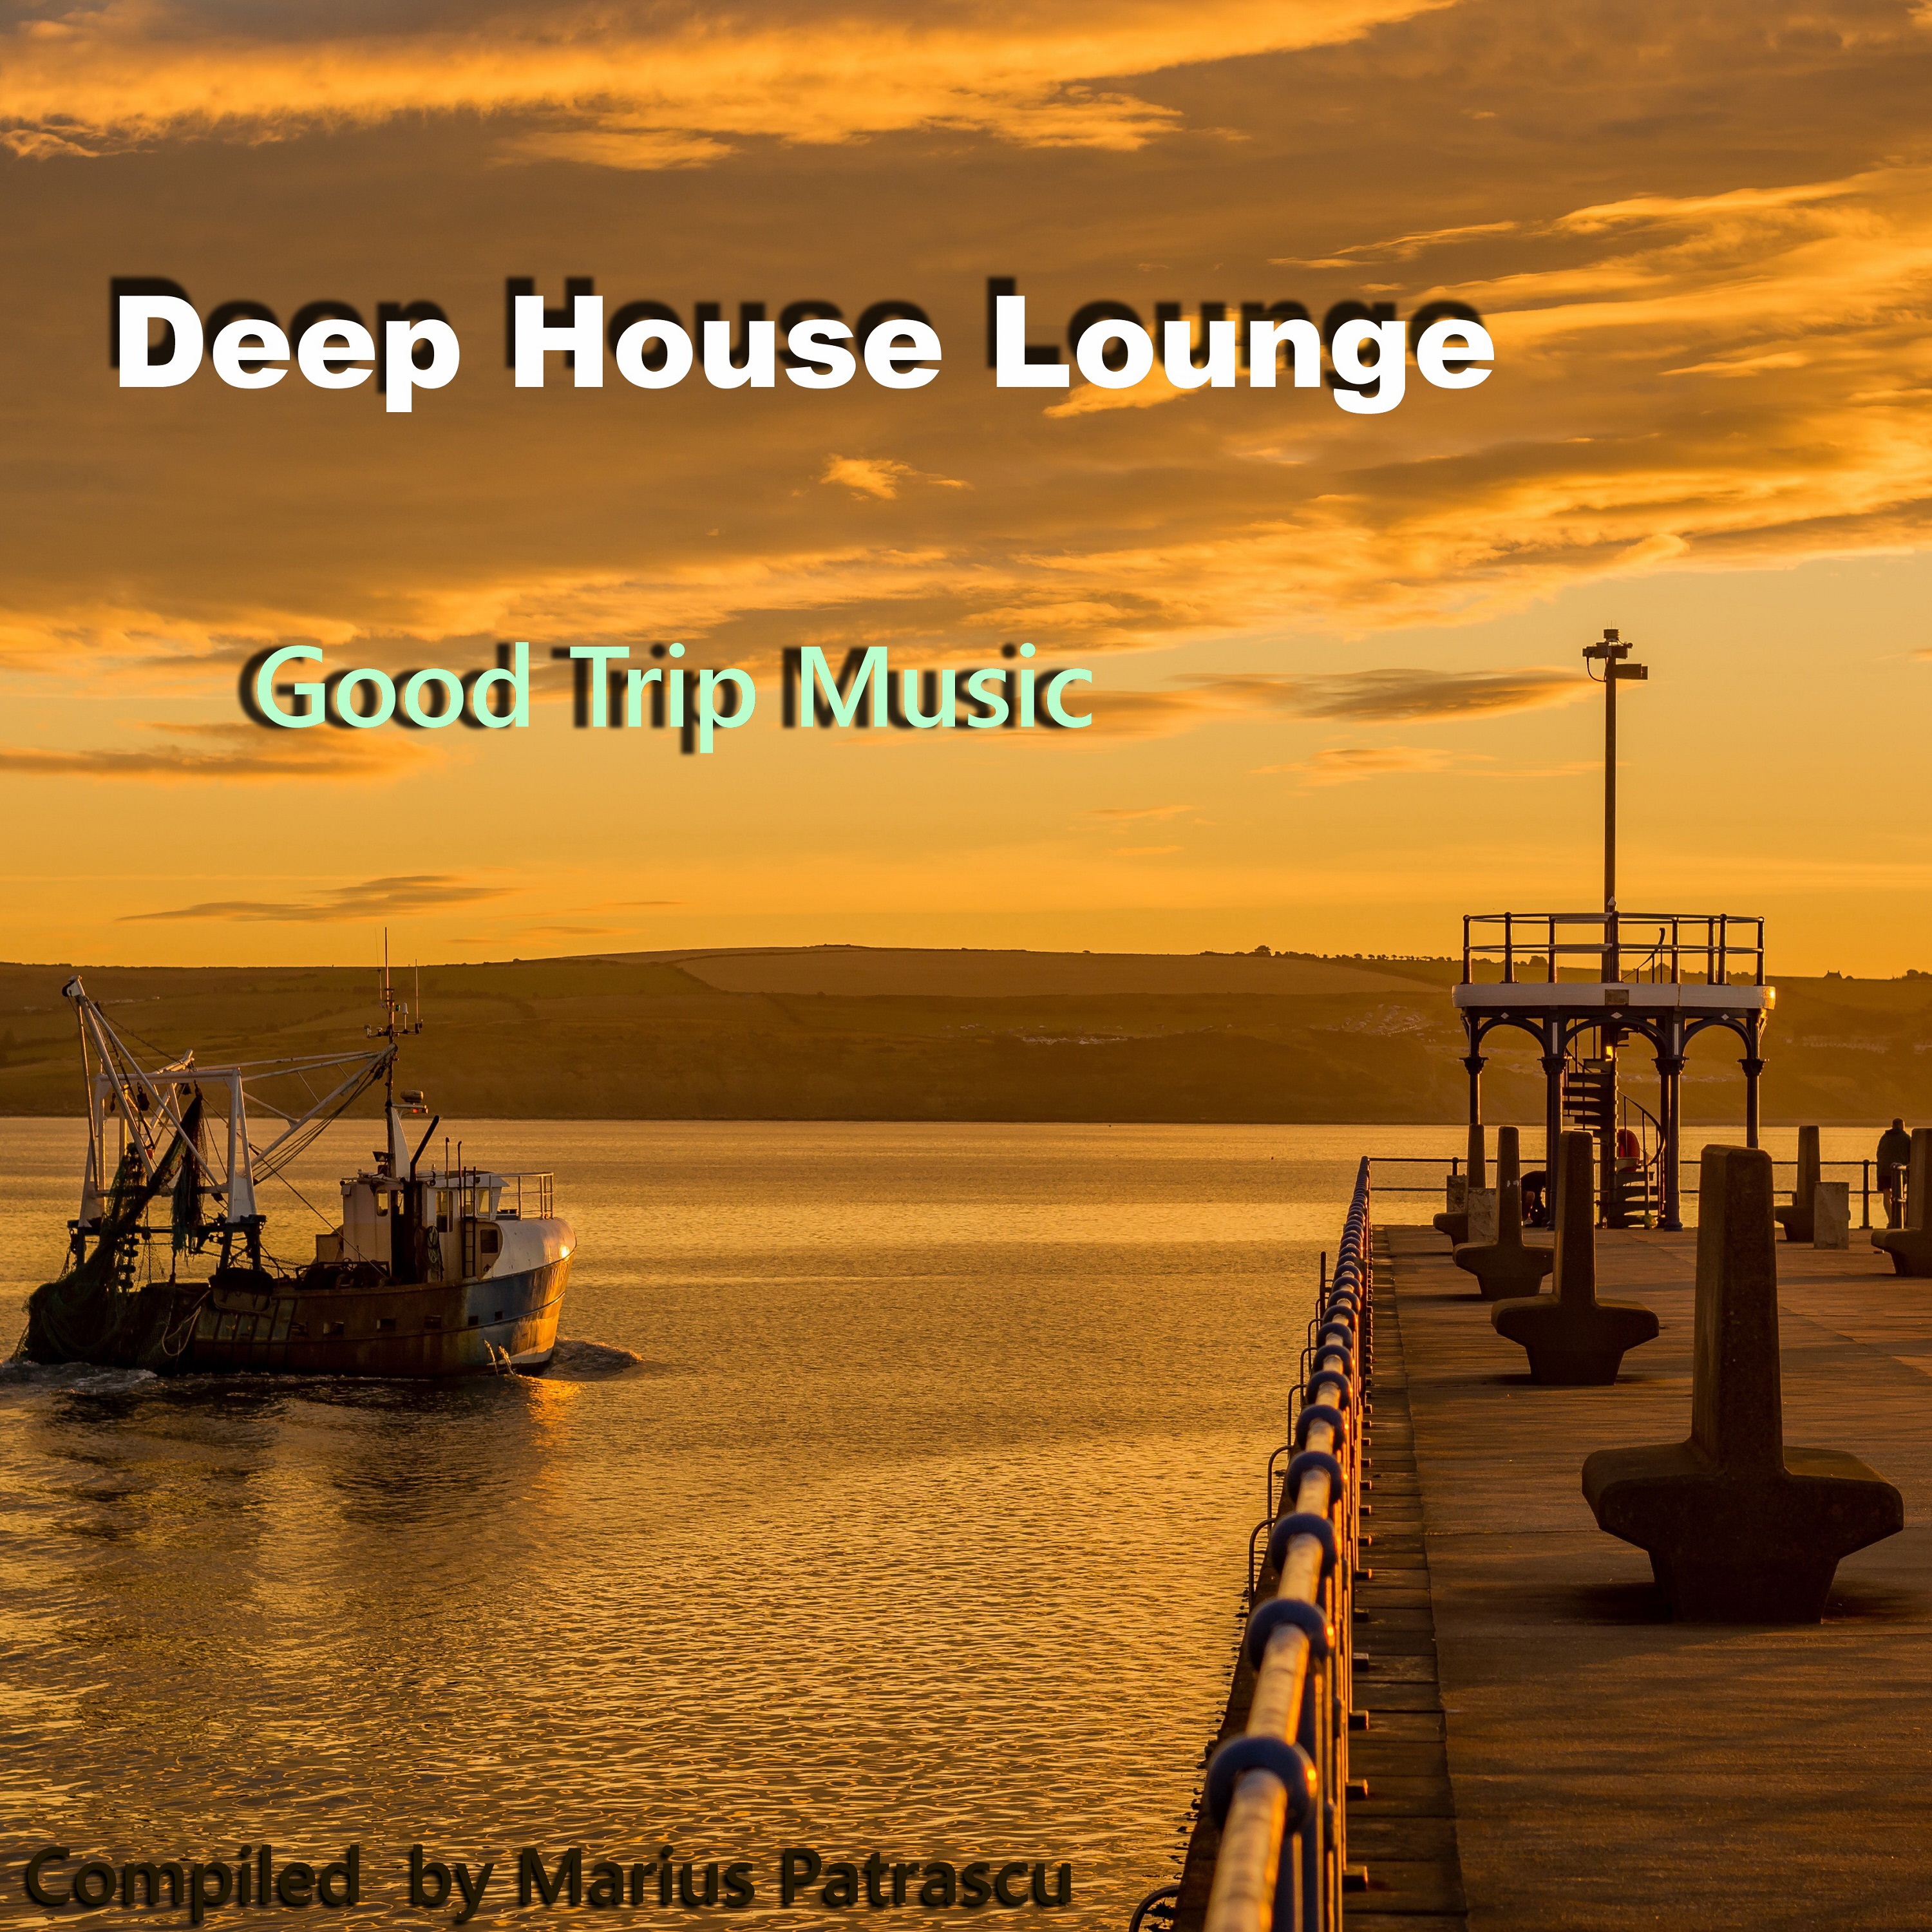 Deep House Lounge Good Trip Music (Compiled and Mixed by Marius Patrascu)